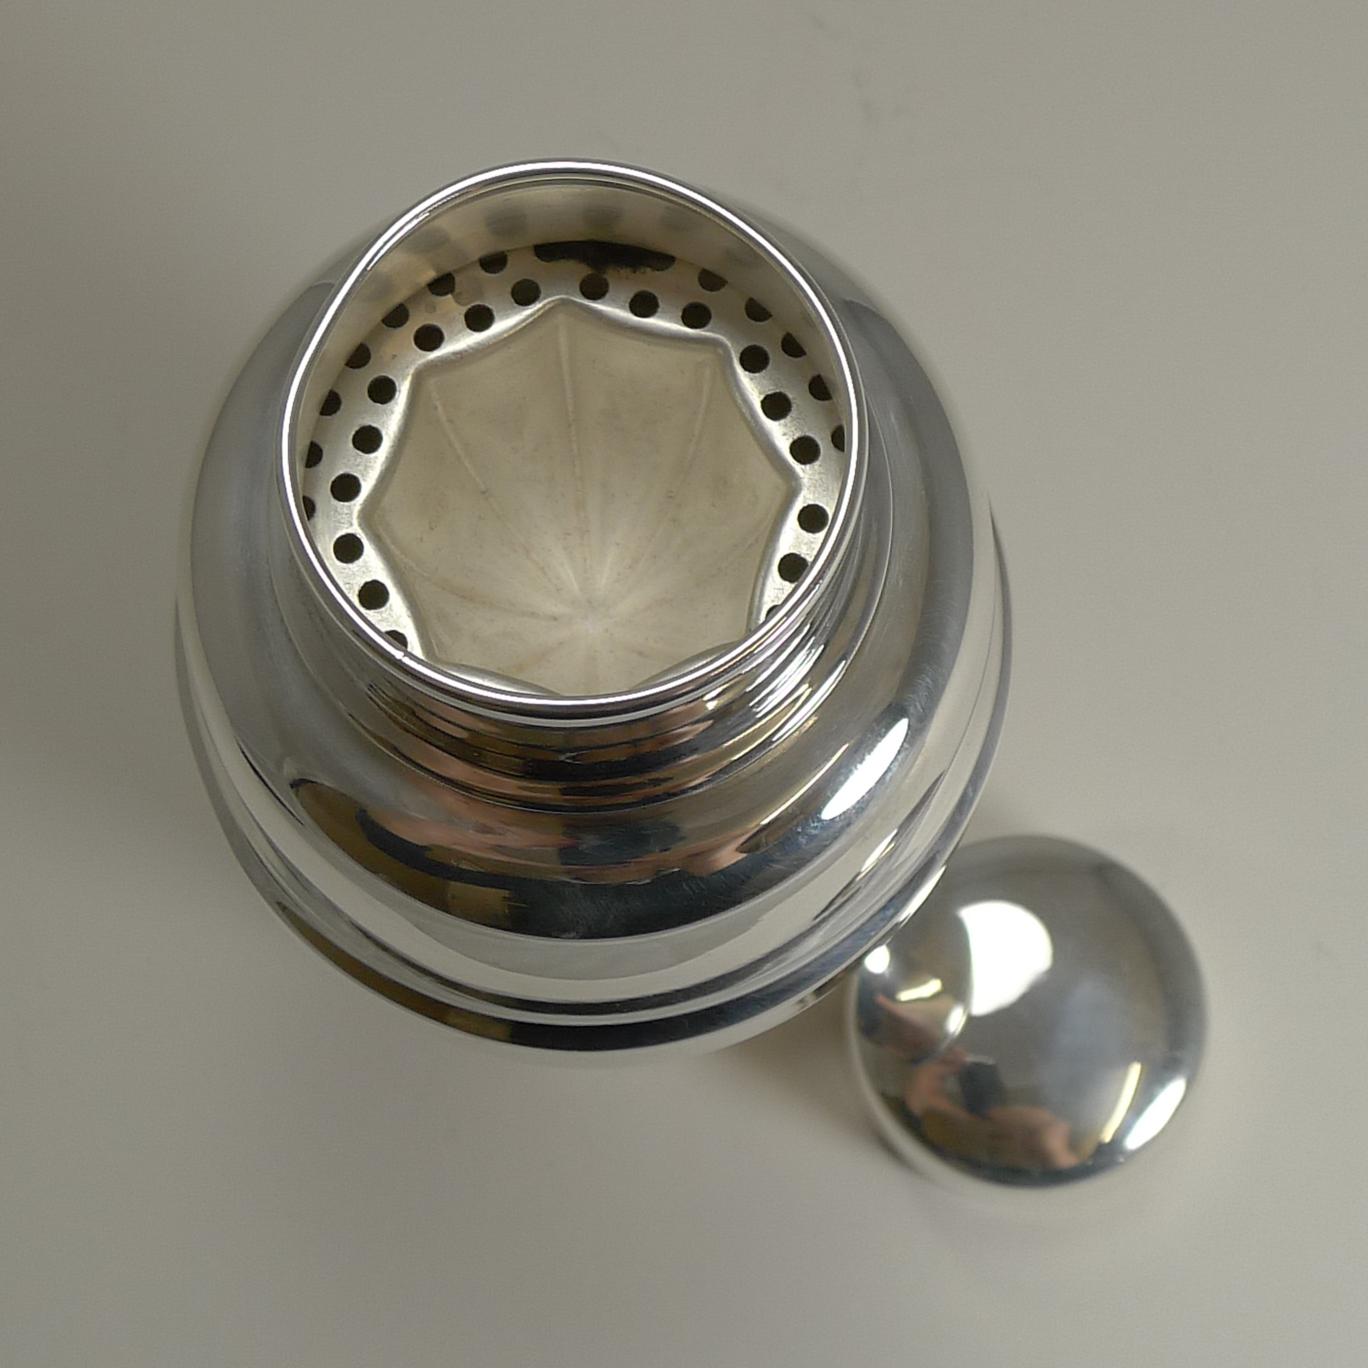 Mid-20th Century Art Deco English Silver Plated Cocktail Shaker with Lemon Squeezer, circa 1930